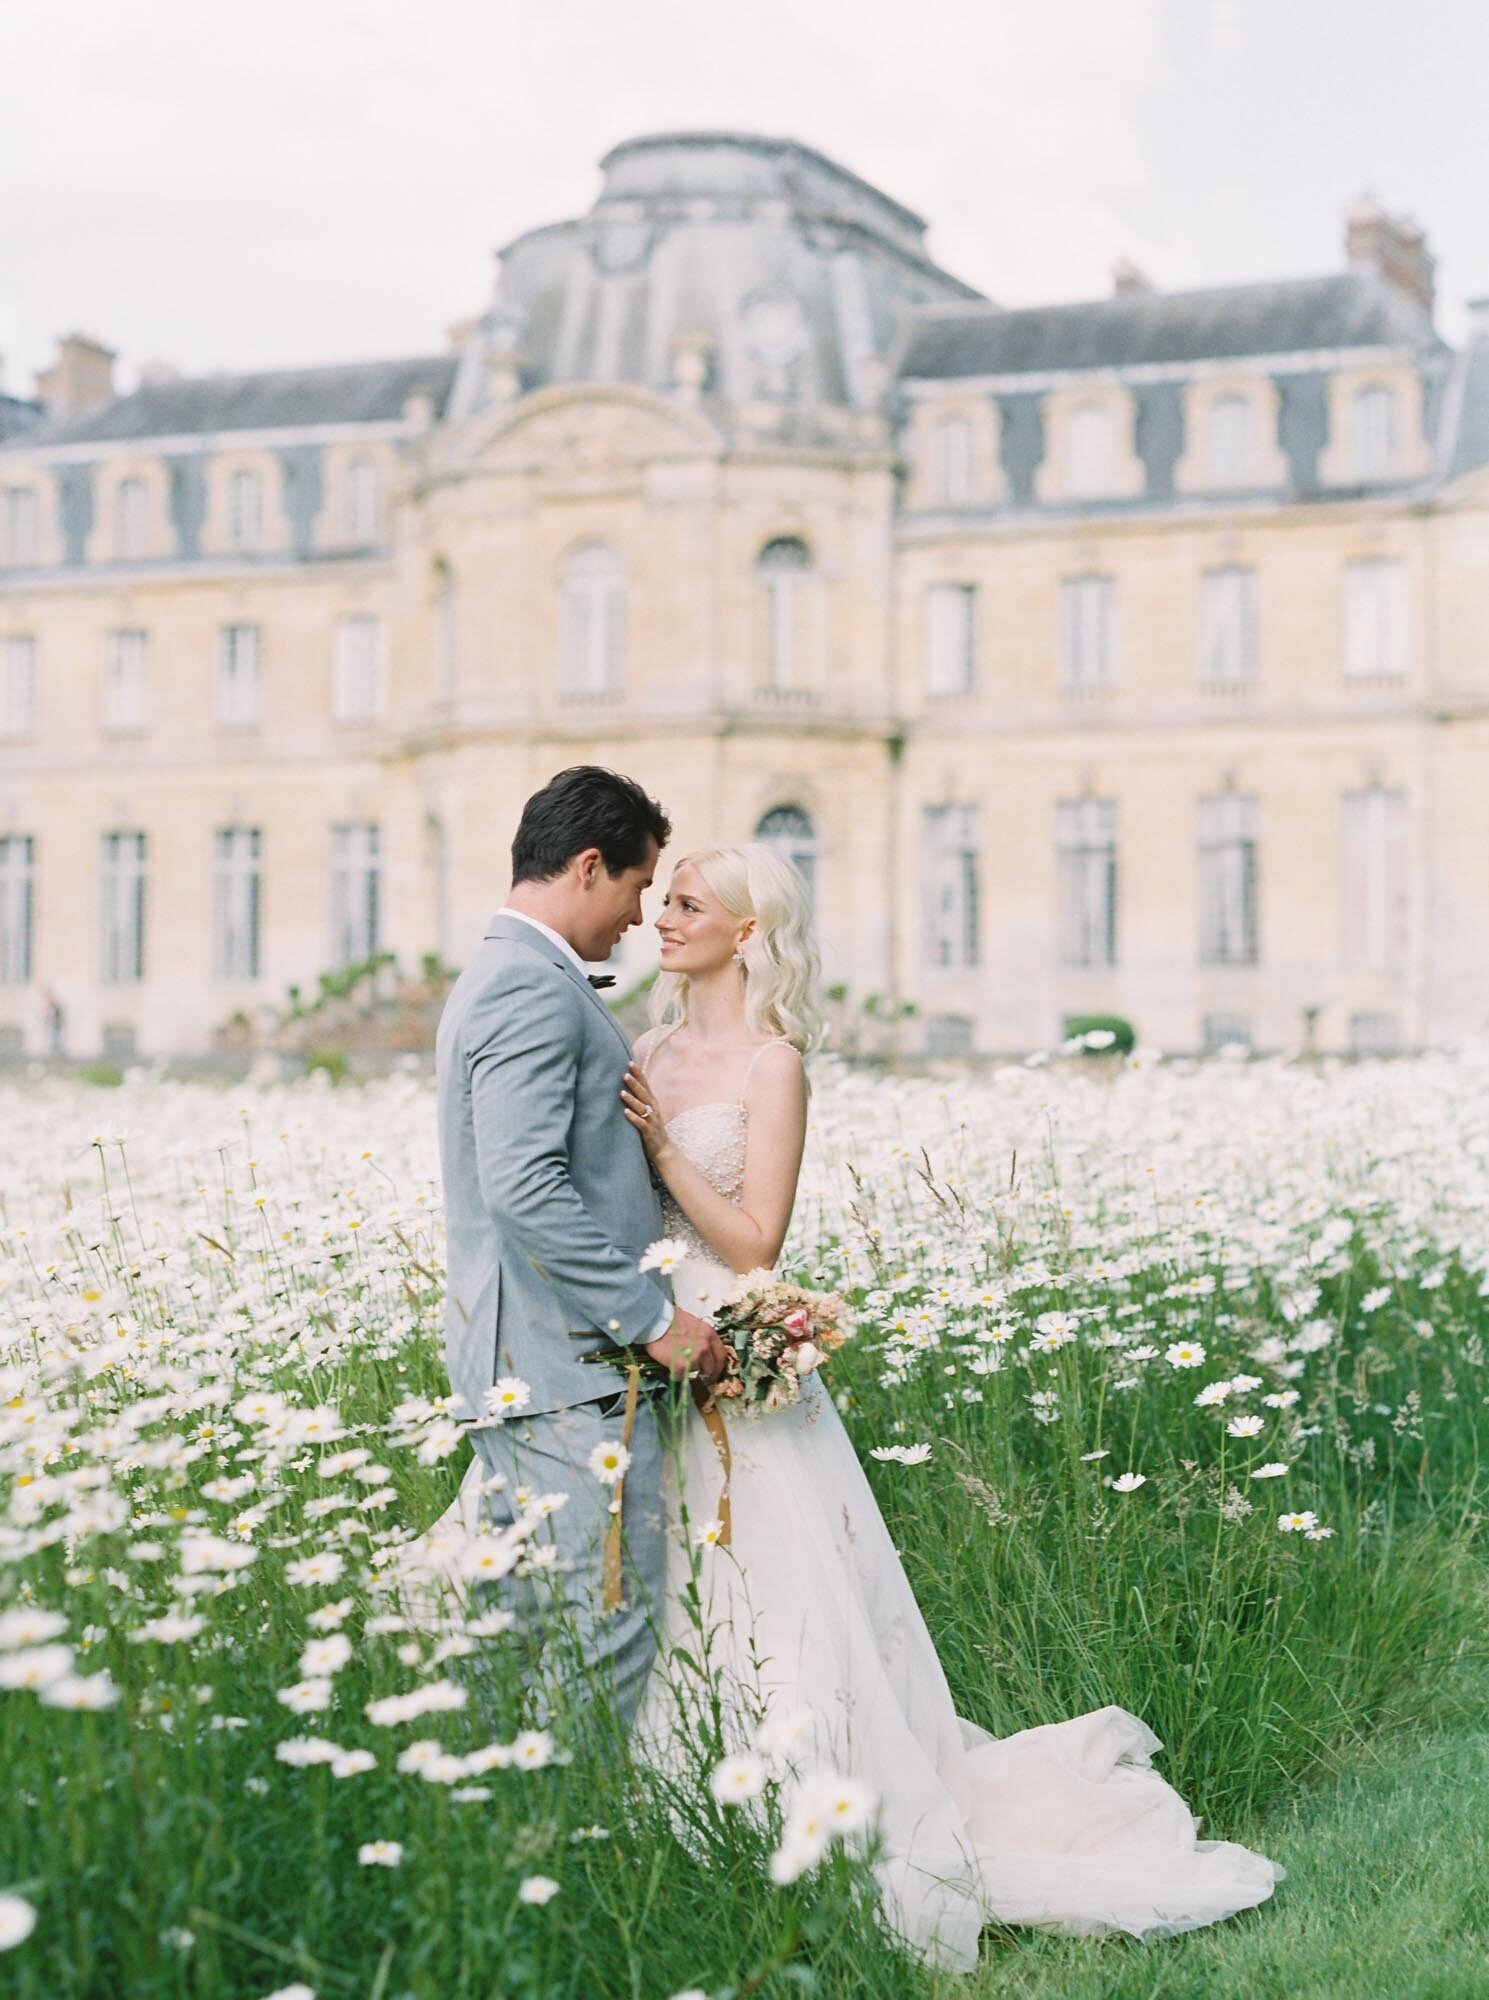 Bride and groom in a margarita flower field at Château de Champlâtreux